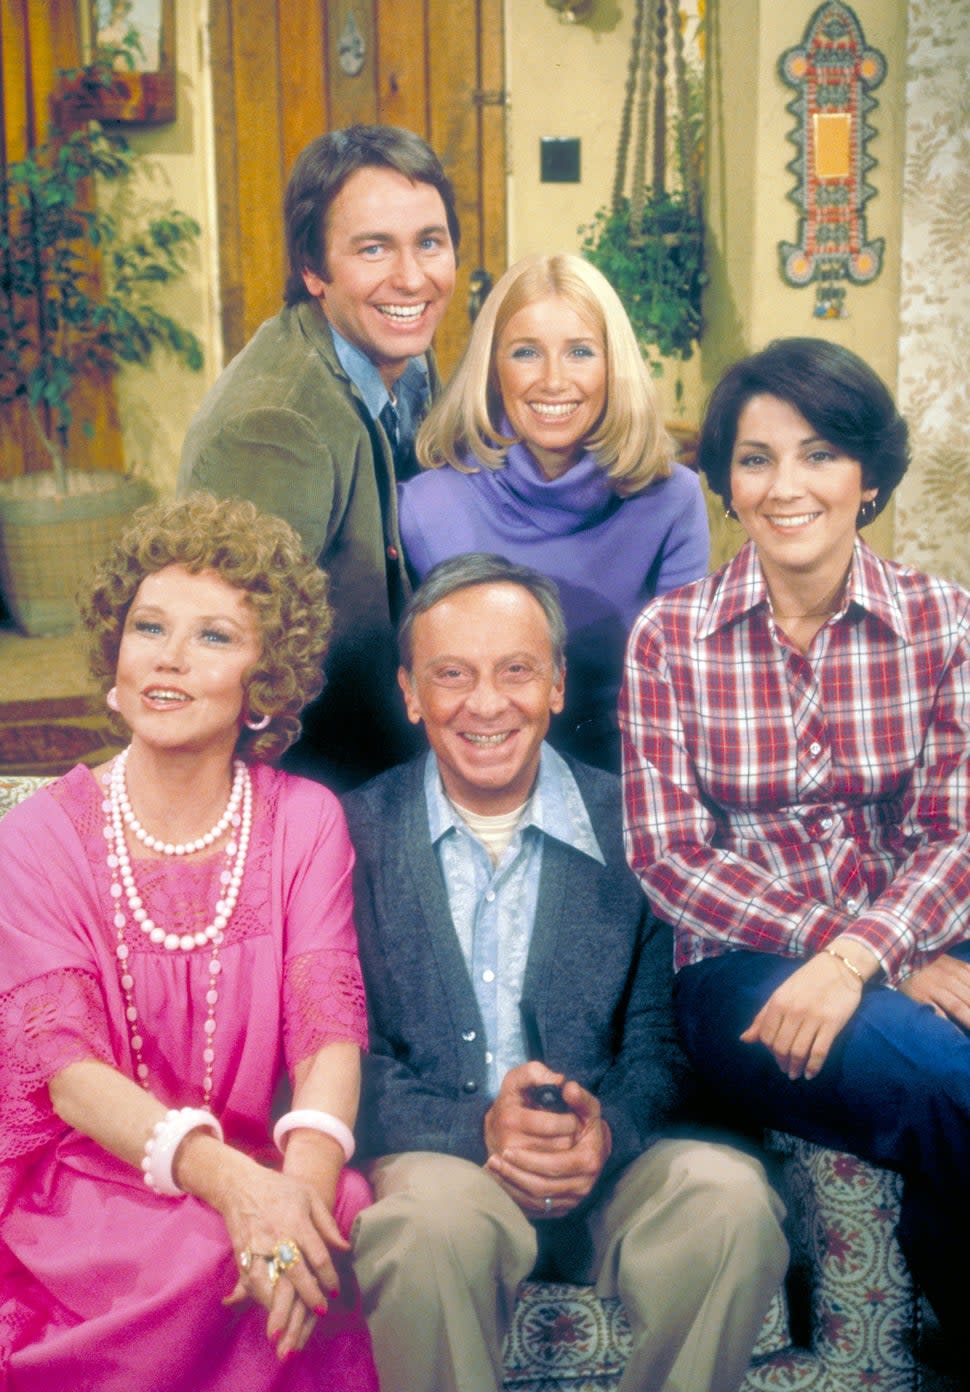 Somers was known for her role in the ABC sitcom, Three's Company